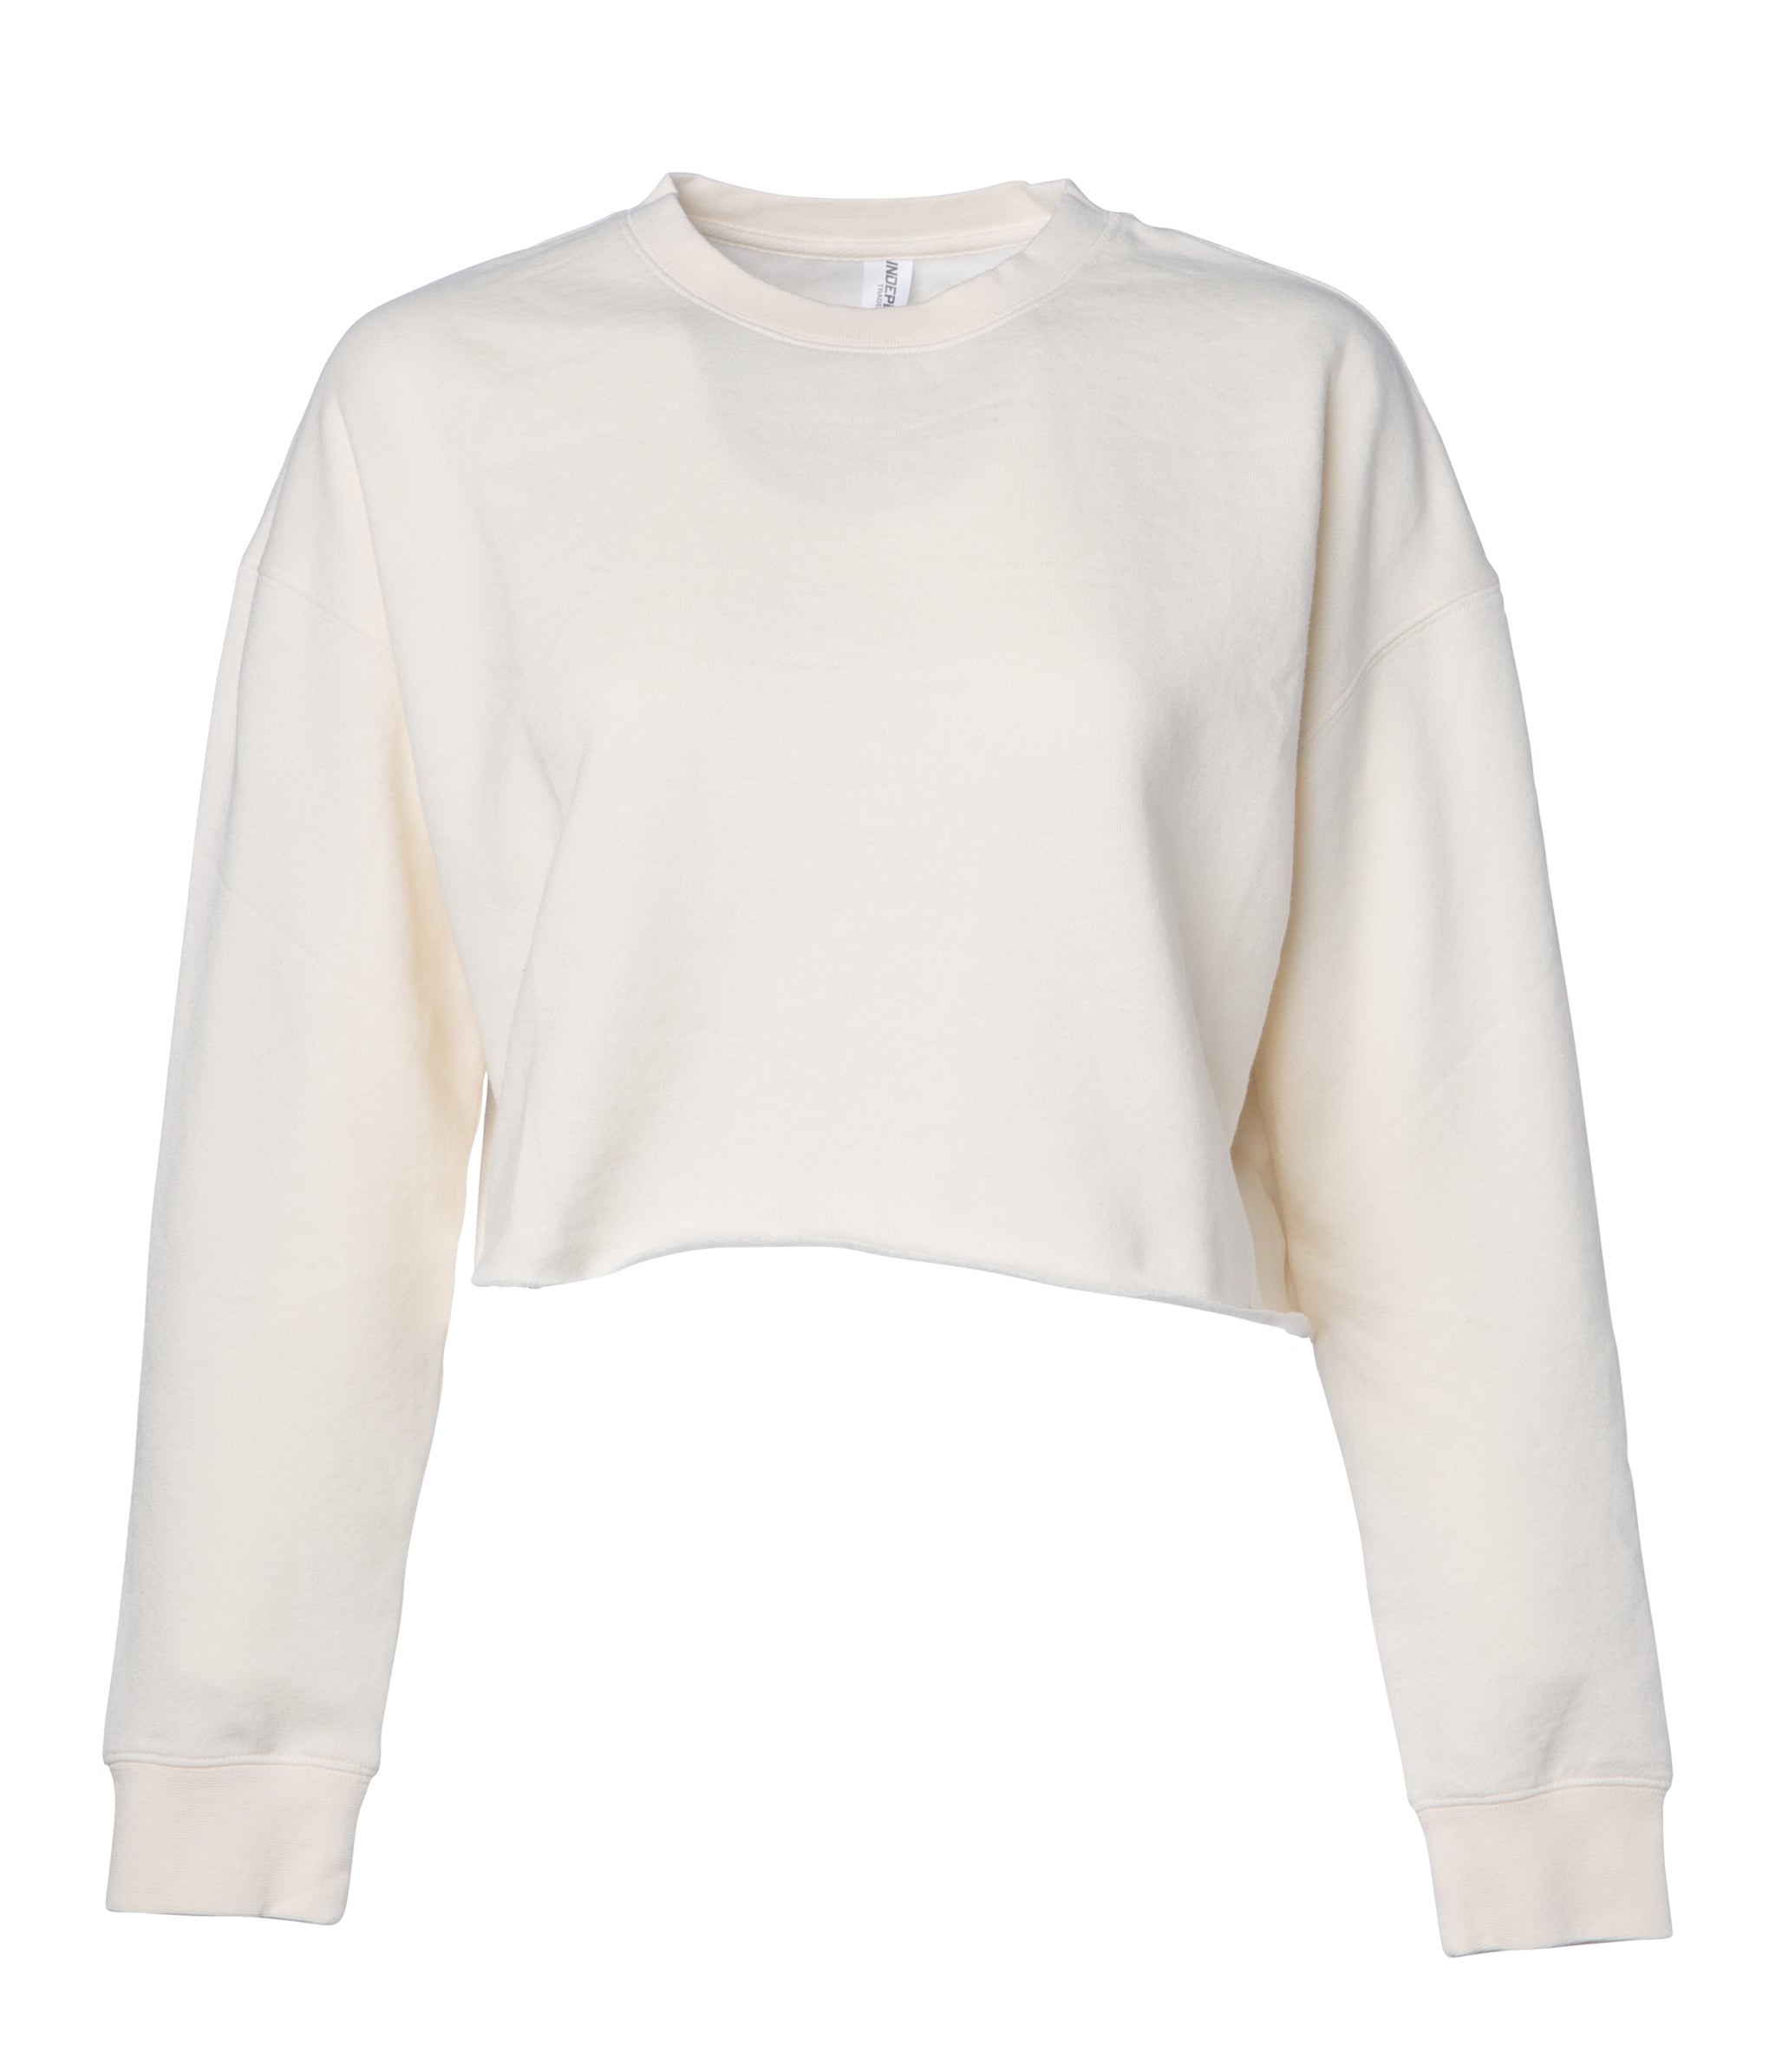 Women's Lightweight Crop Crew Neck Sweatshirt  Independent Trading Co. -  Independent Trading Company